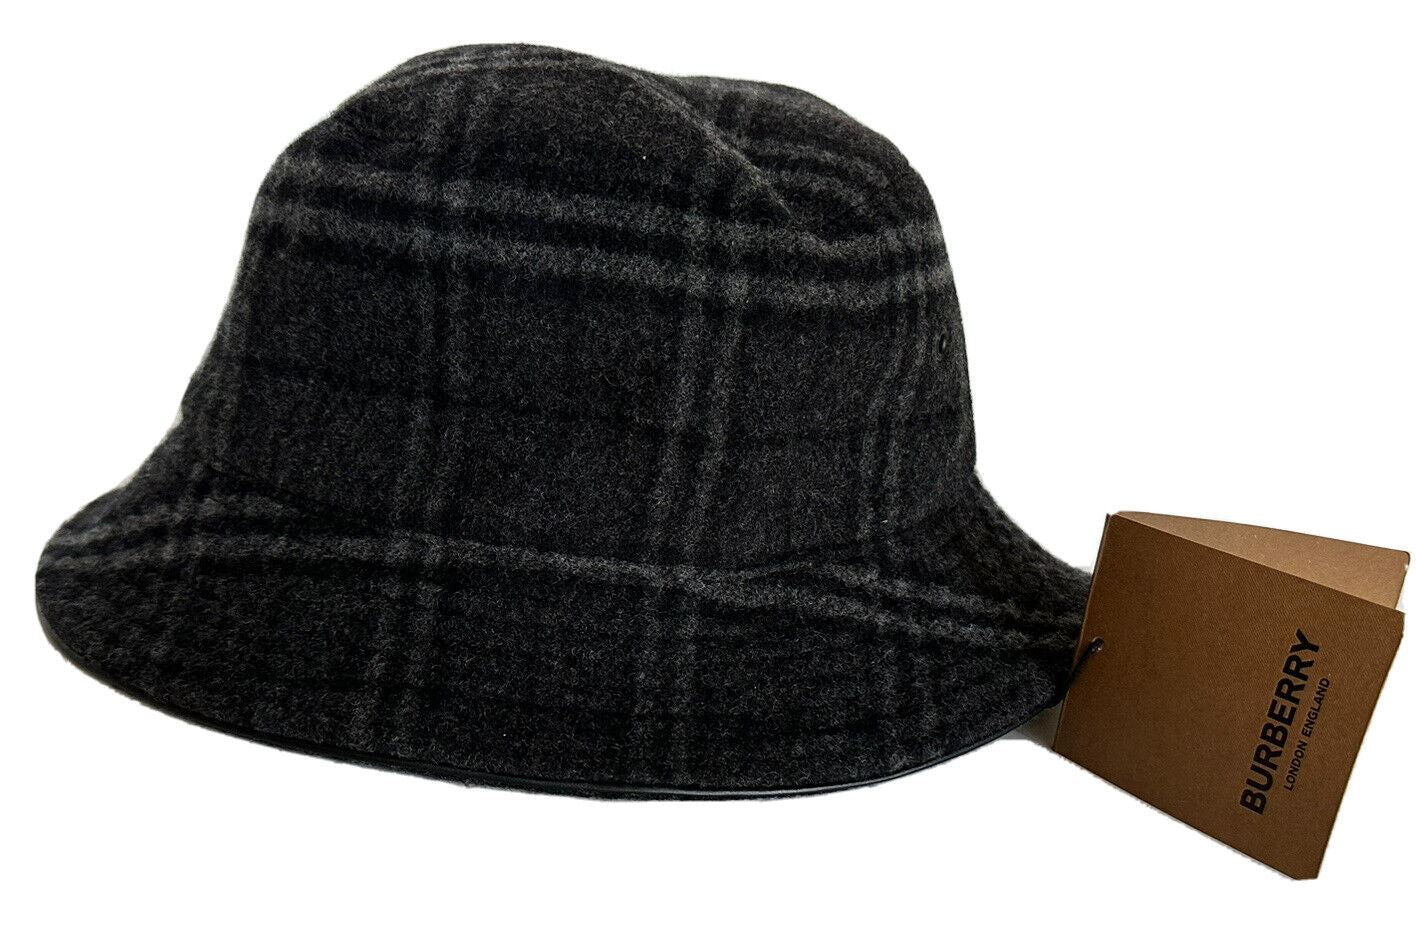 NWT $530 Burberry Check Bucket Hat Wool/Cashmere Black L (59 Euro) 8044077 Italy